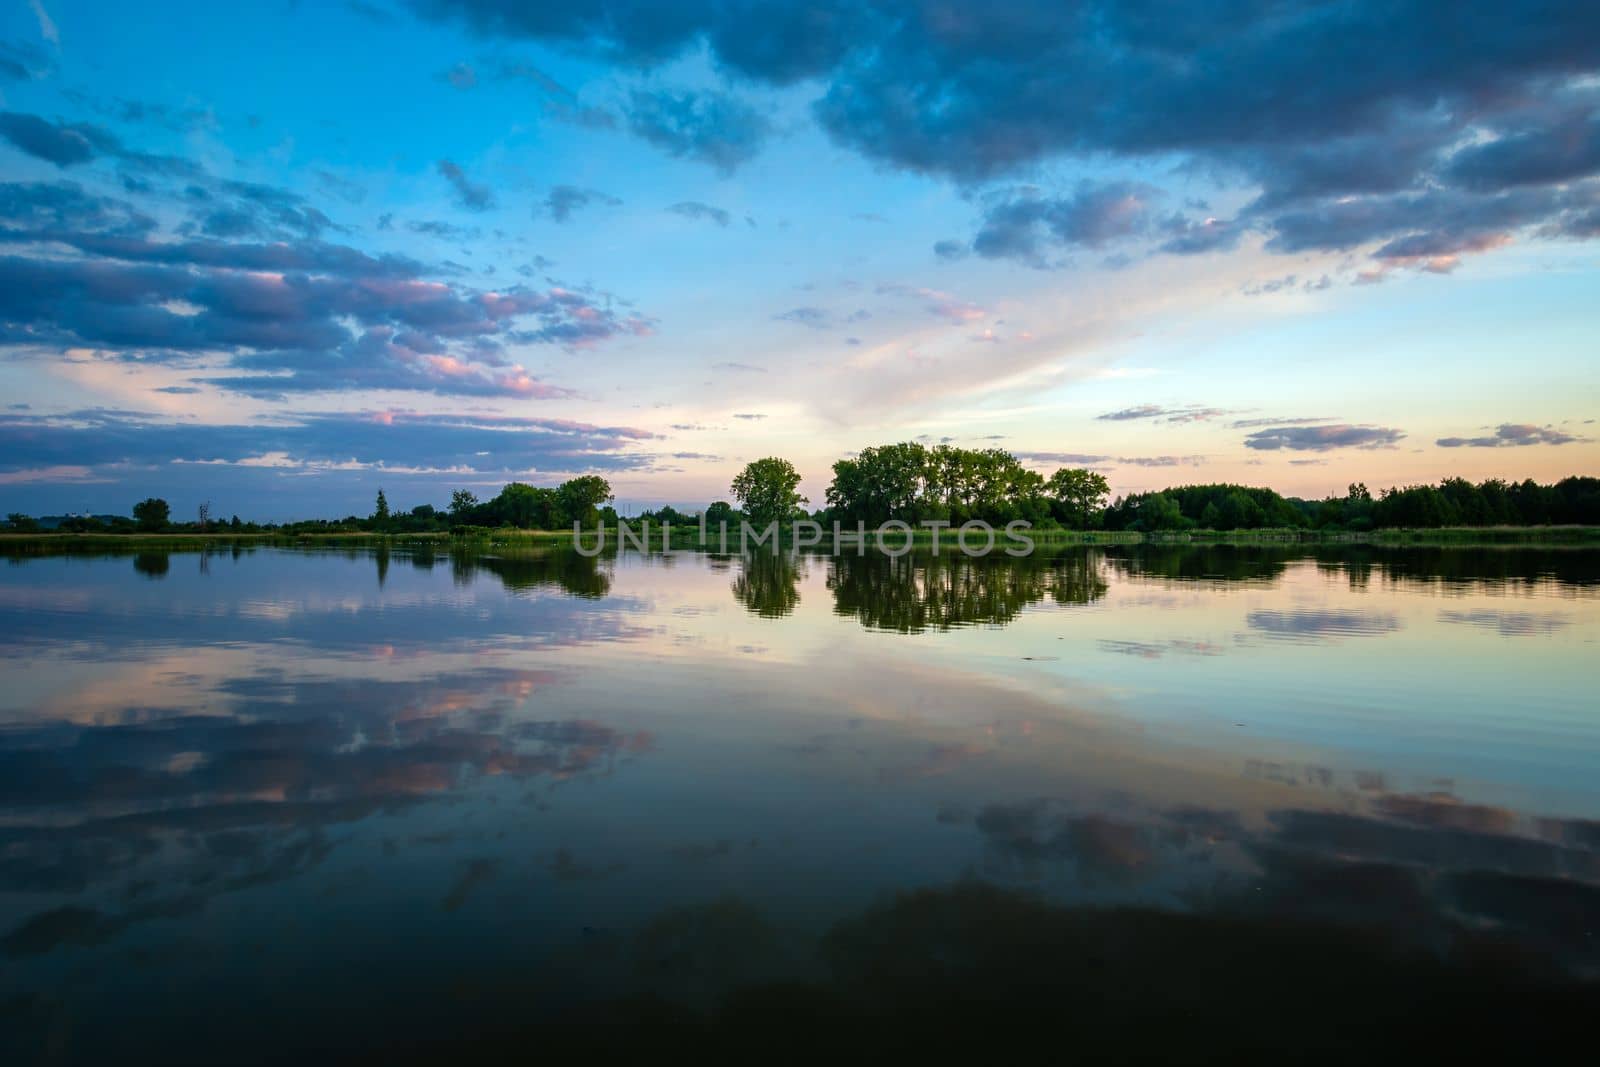 Reflection of evening clouds in the water of a calm lake, Stankow, Lubelskie, Poland